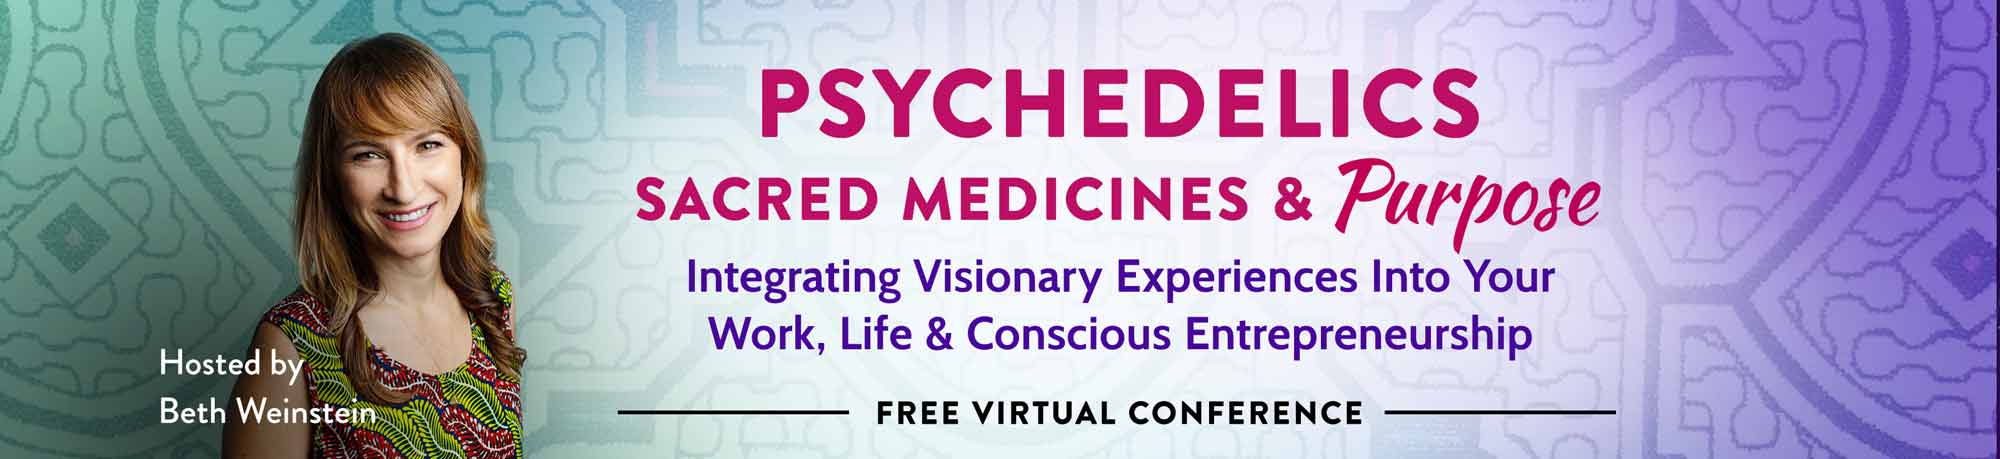 Psychedelics, Sacred Medicine & Purpose: Integrating visionary Experiences into Your Work, Life & Conscious Entrepreneurship